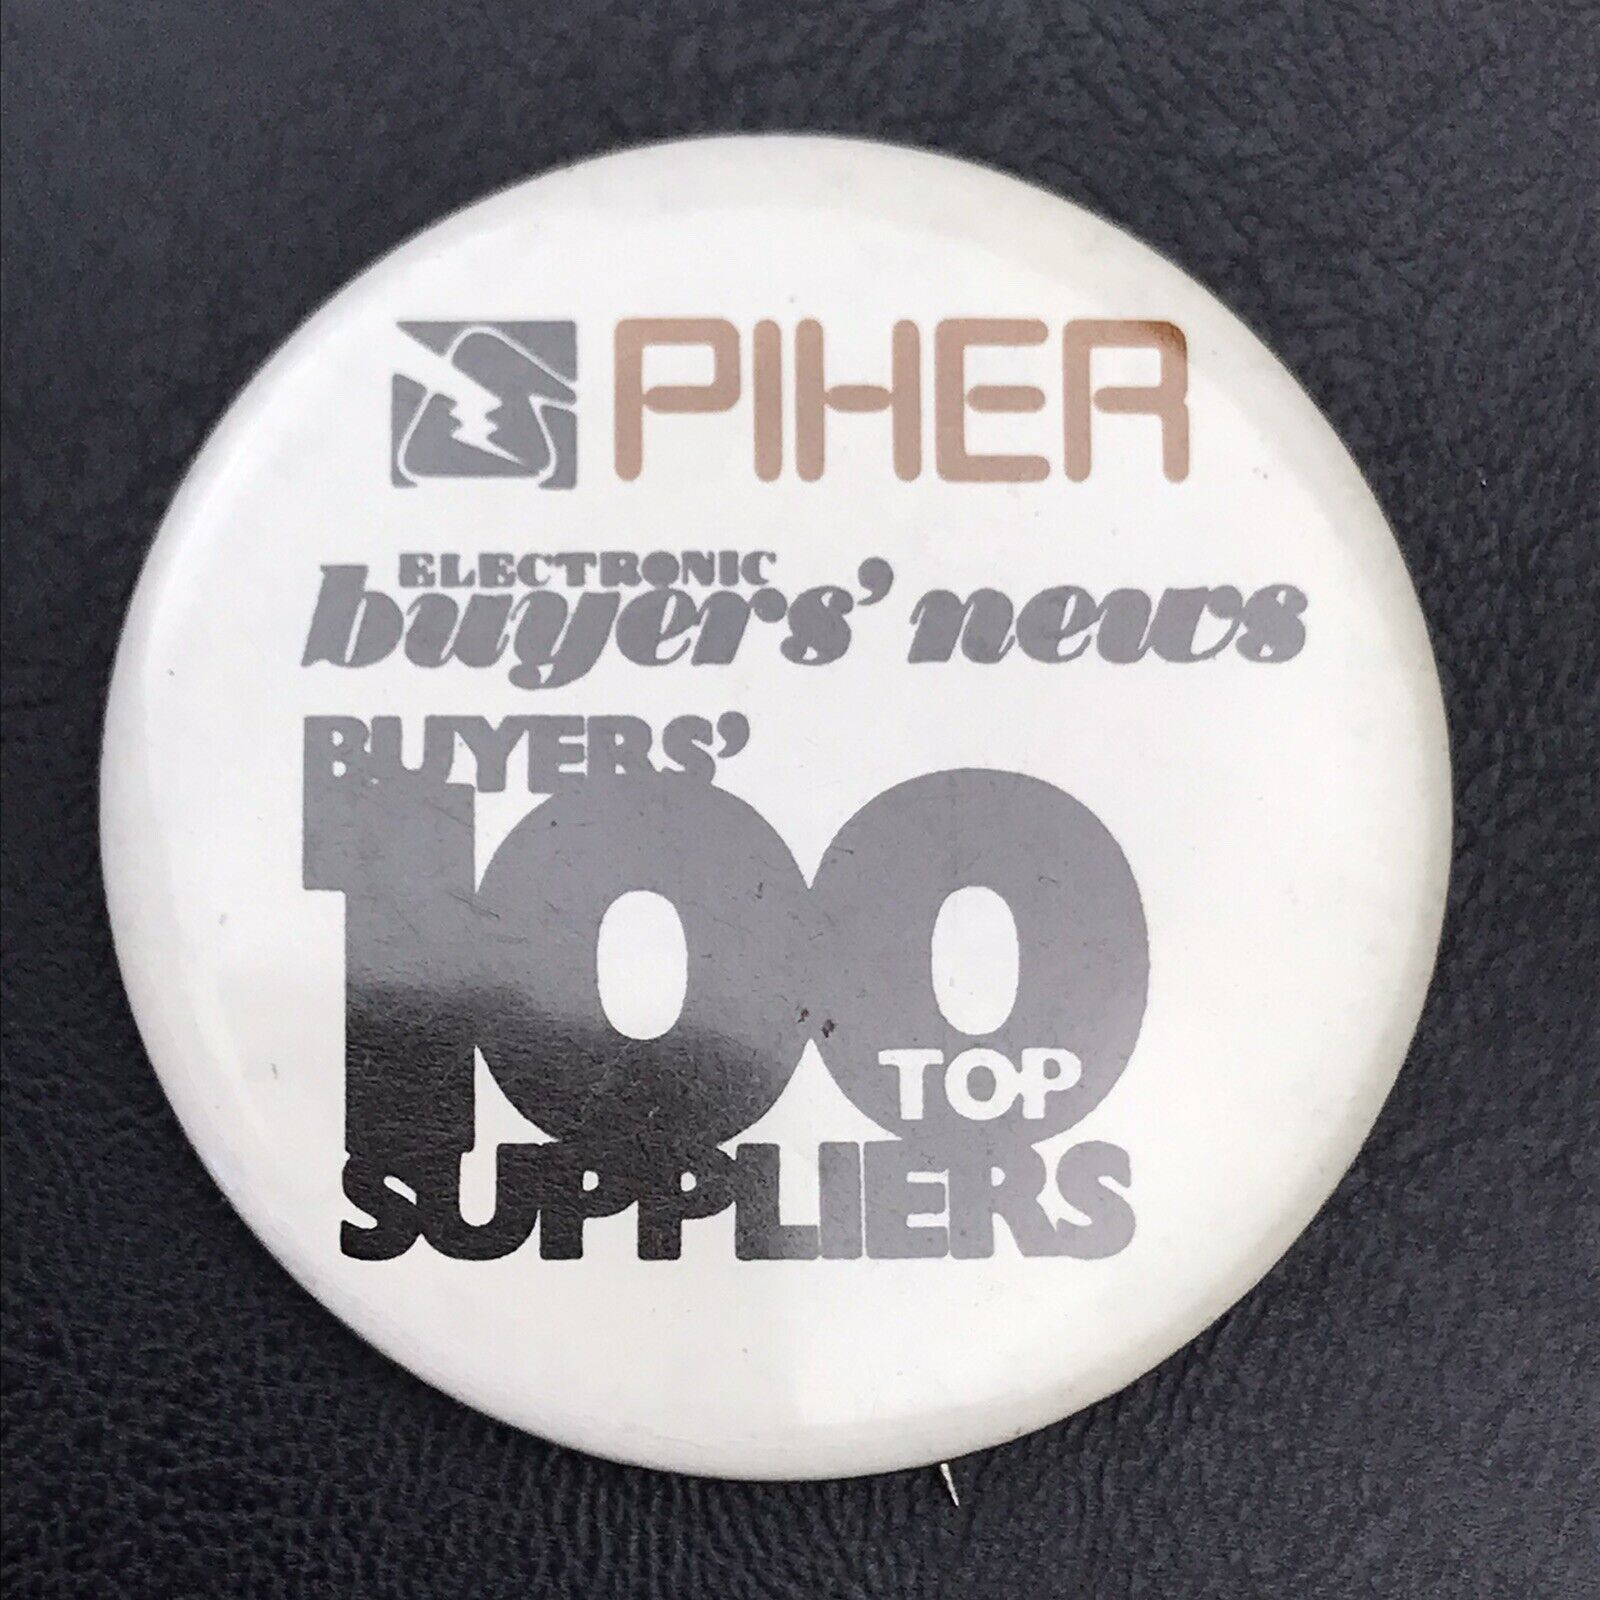 PIHER Buyers’ News Vintage Pin Button Top 100 Suppliers